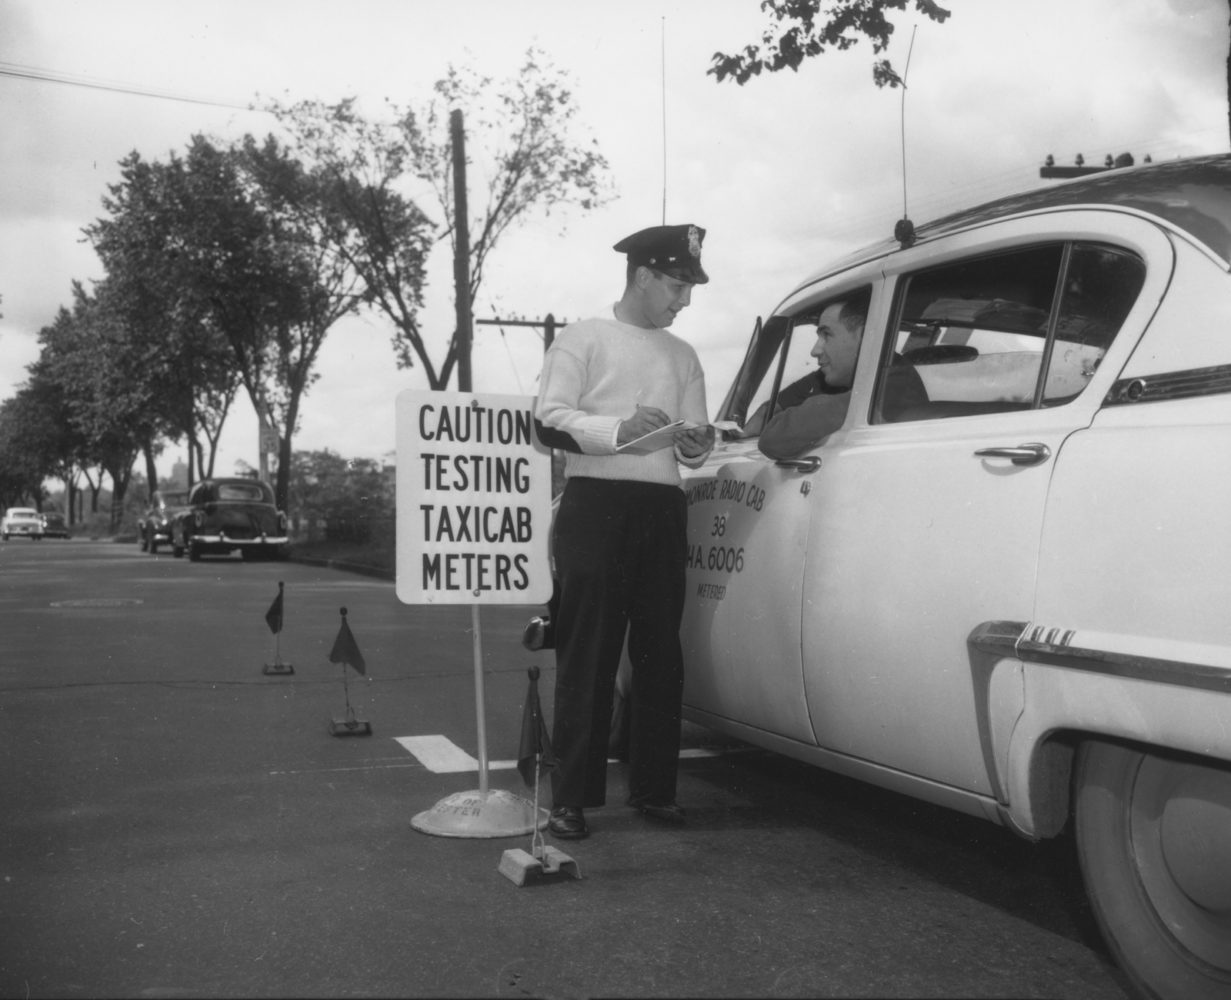 Taxi cab meter testing by Weights & Measures 1954- photo from City of Rochester